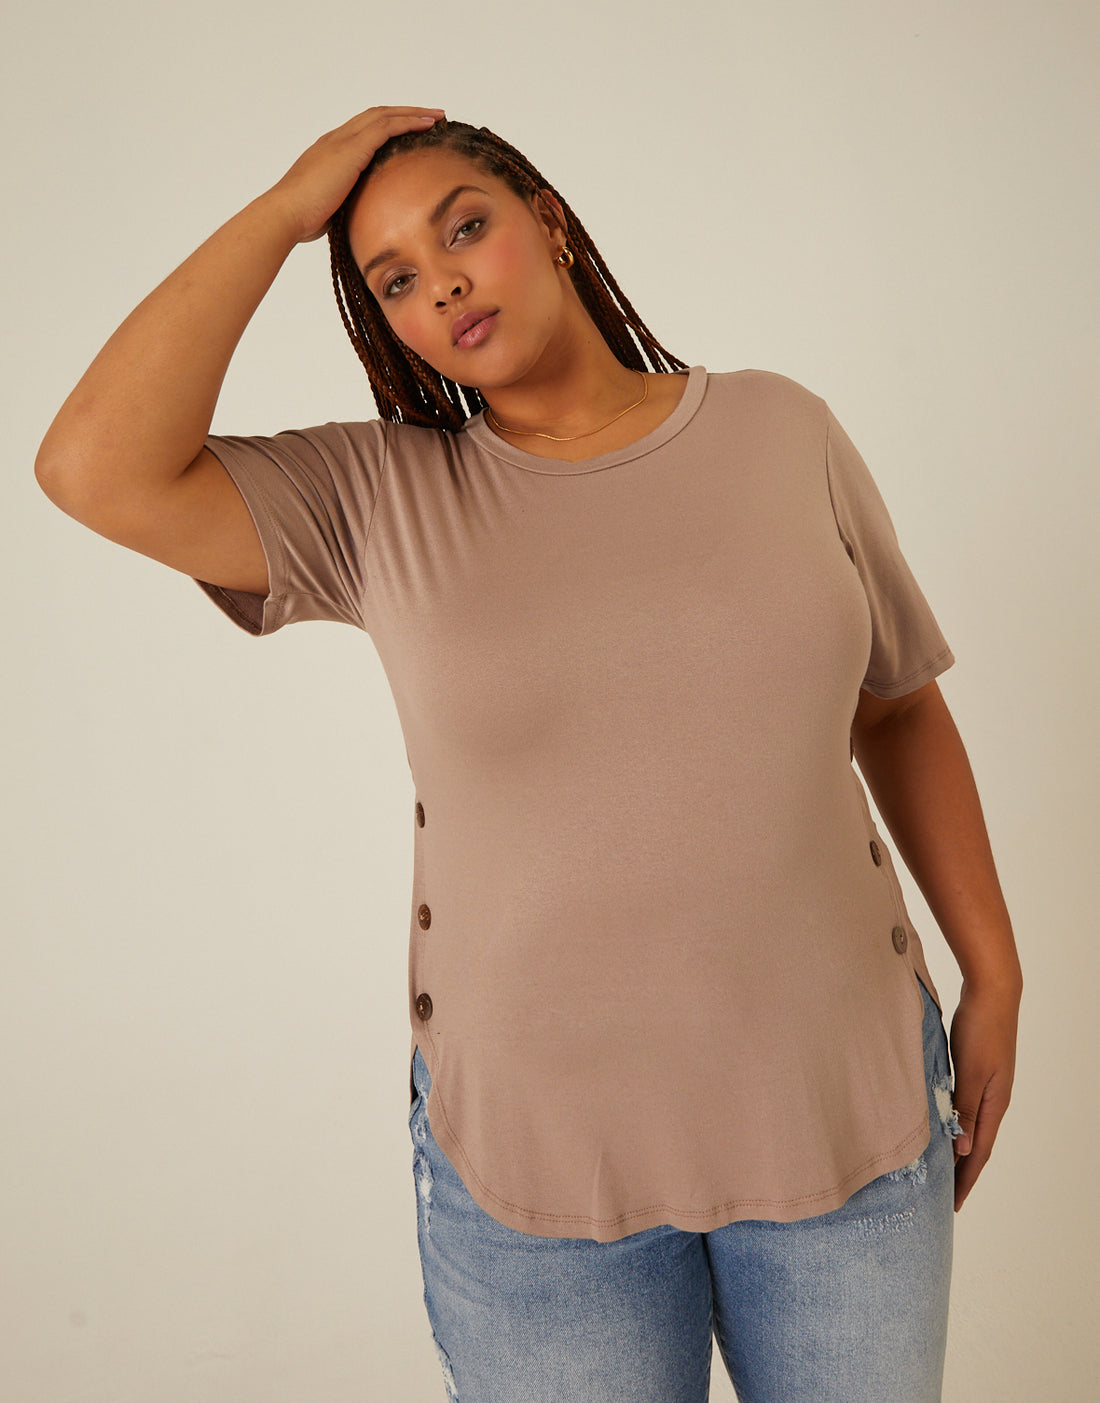 Curve Side Button Tee Plus Size Tops Taupe 1XL -2020AVE